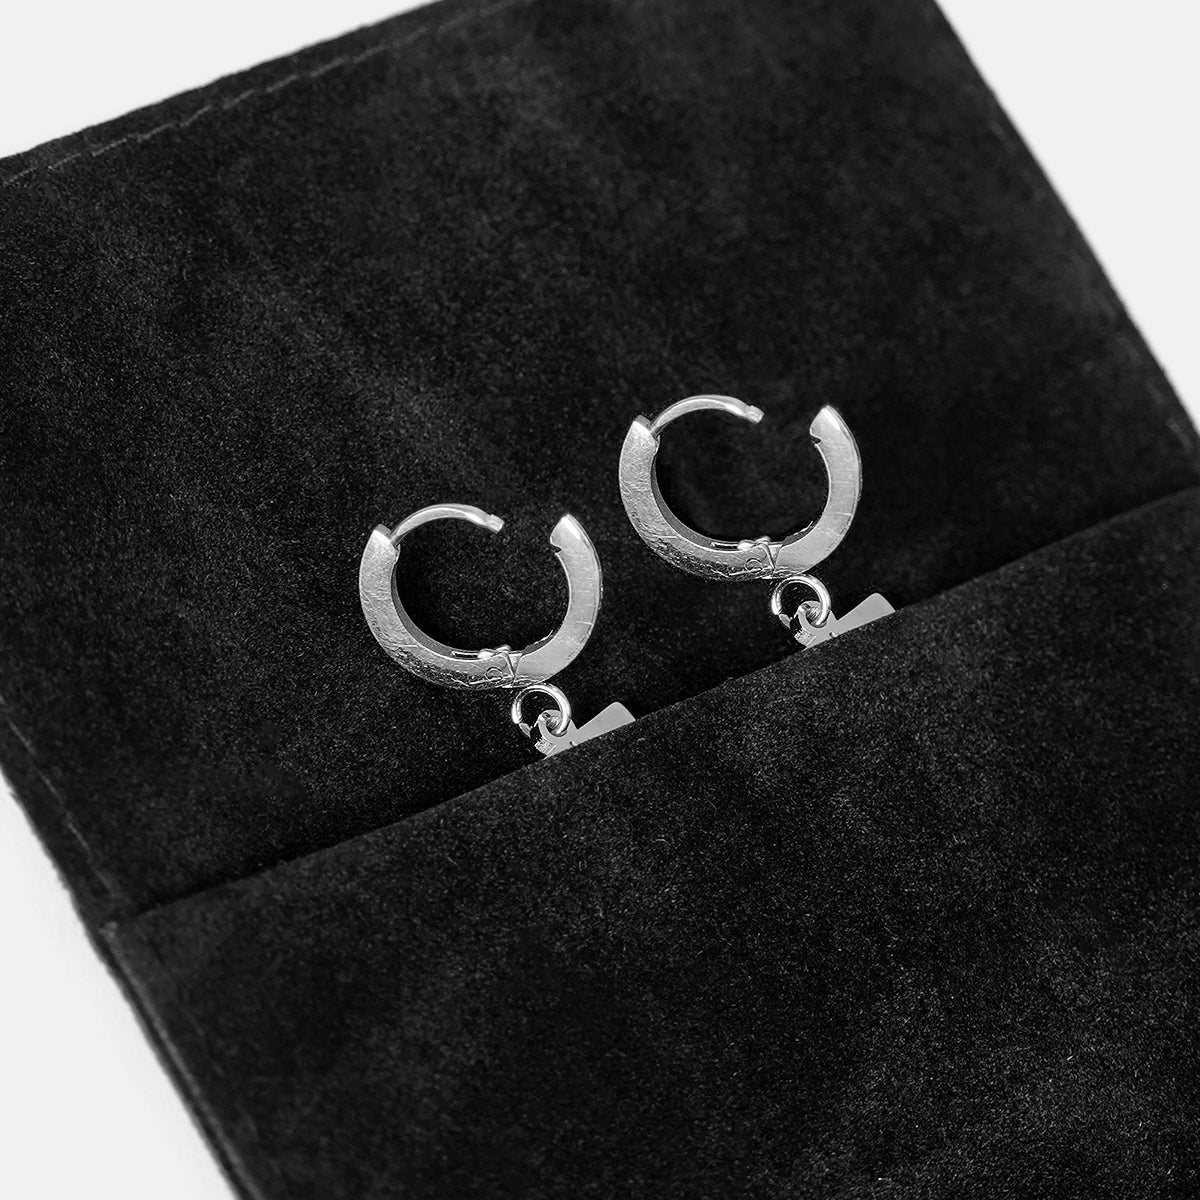 83 Number Earring - Stainless Steel